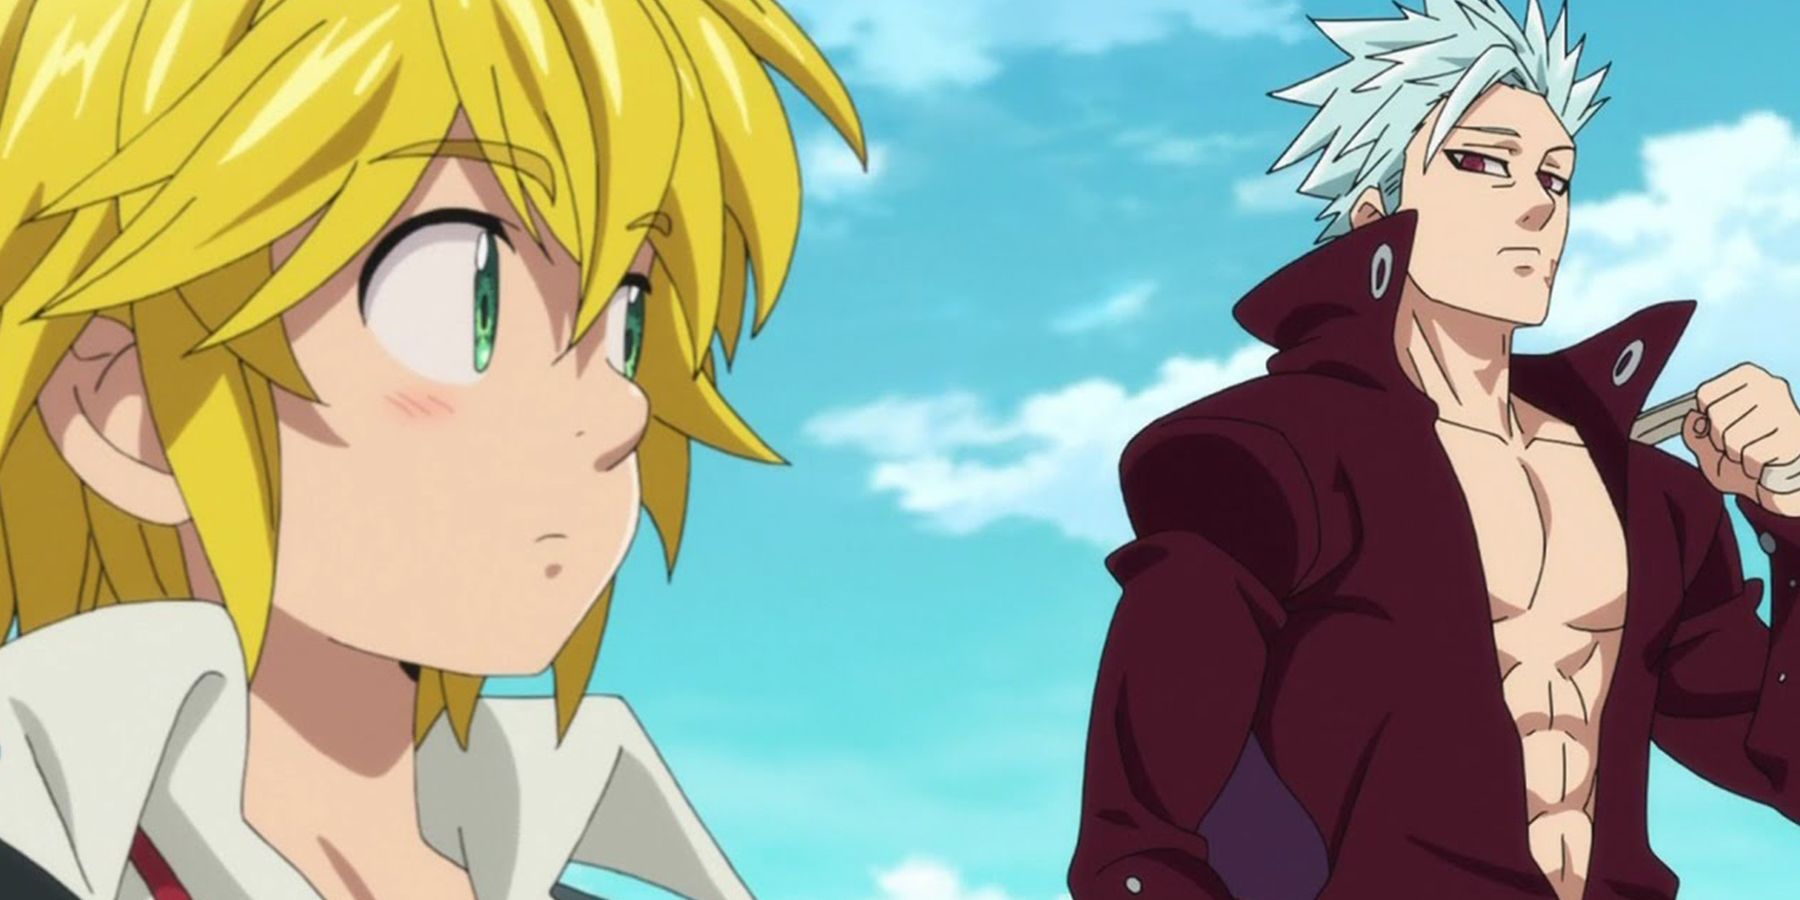 Ban and Meliodas looking at each other (The Seven Deadly Sins)